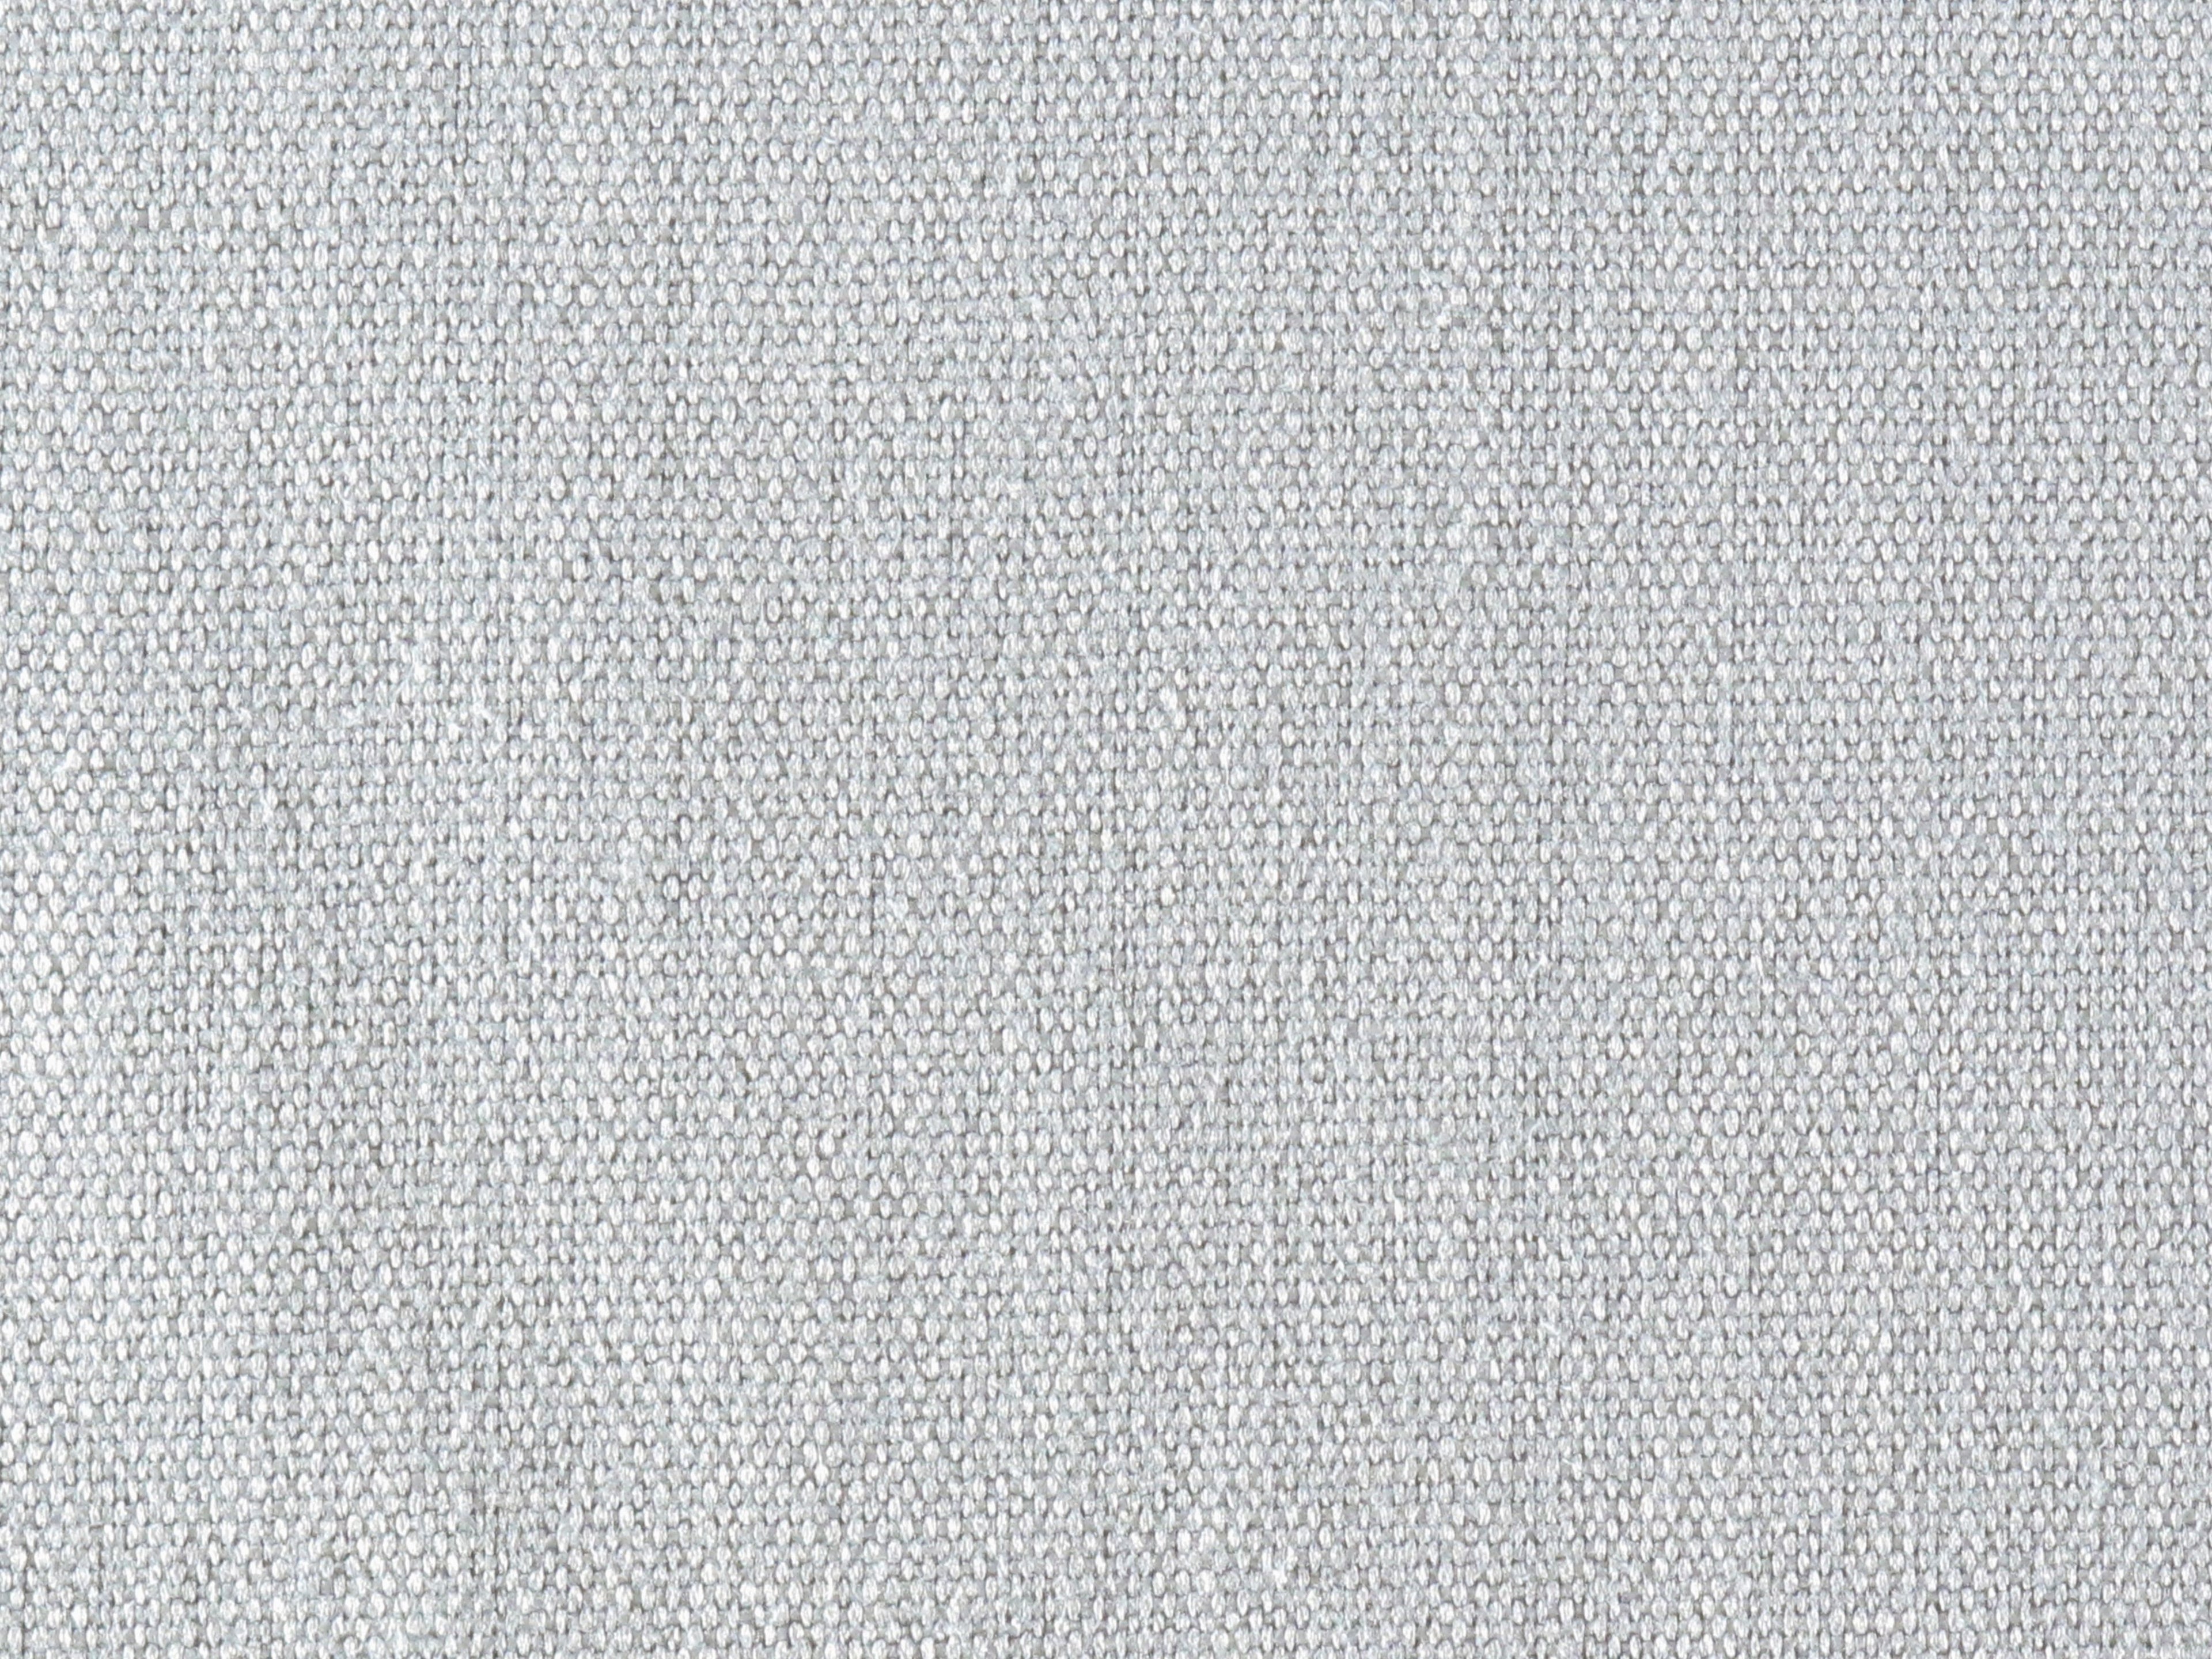 Lakeside Linen fabric in zephyr color - pattern number PK 0004LAKE - by Scalamandre in the Old World Weavers collection